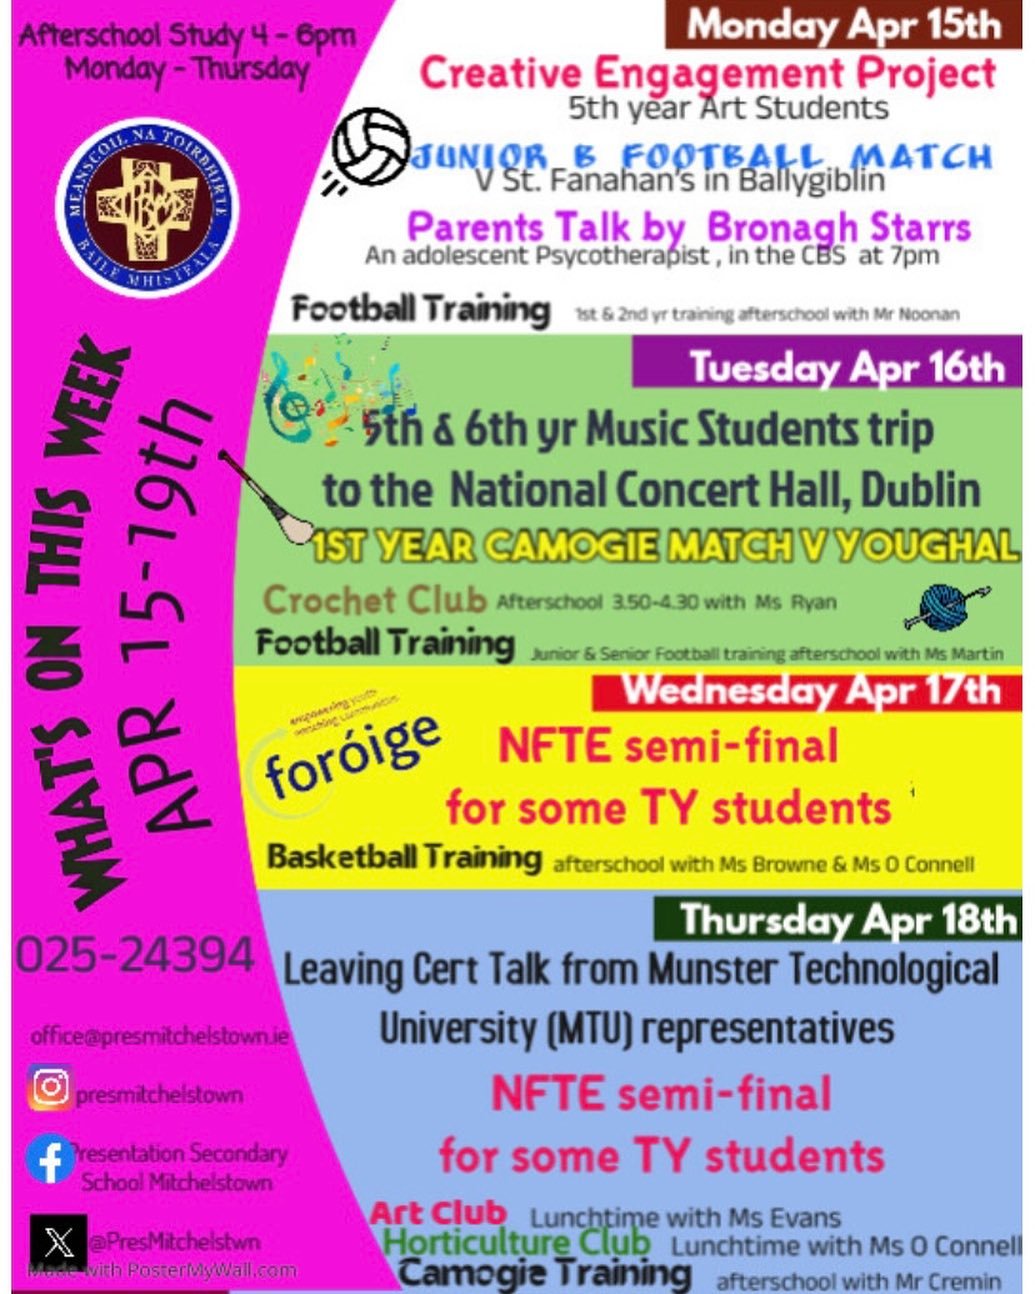 WEEKLY EVENTS 15th-19th April. A week ahead involving music, art, sport and talks, something for all students. Best of luck to our football and camogie teams as they progress further with matches this week, best of luck also to the TY students involv